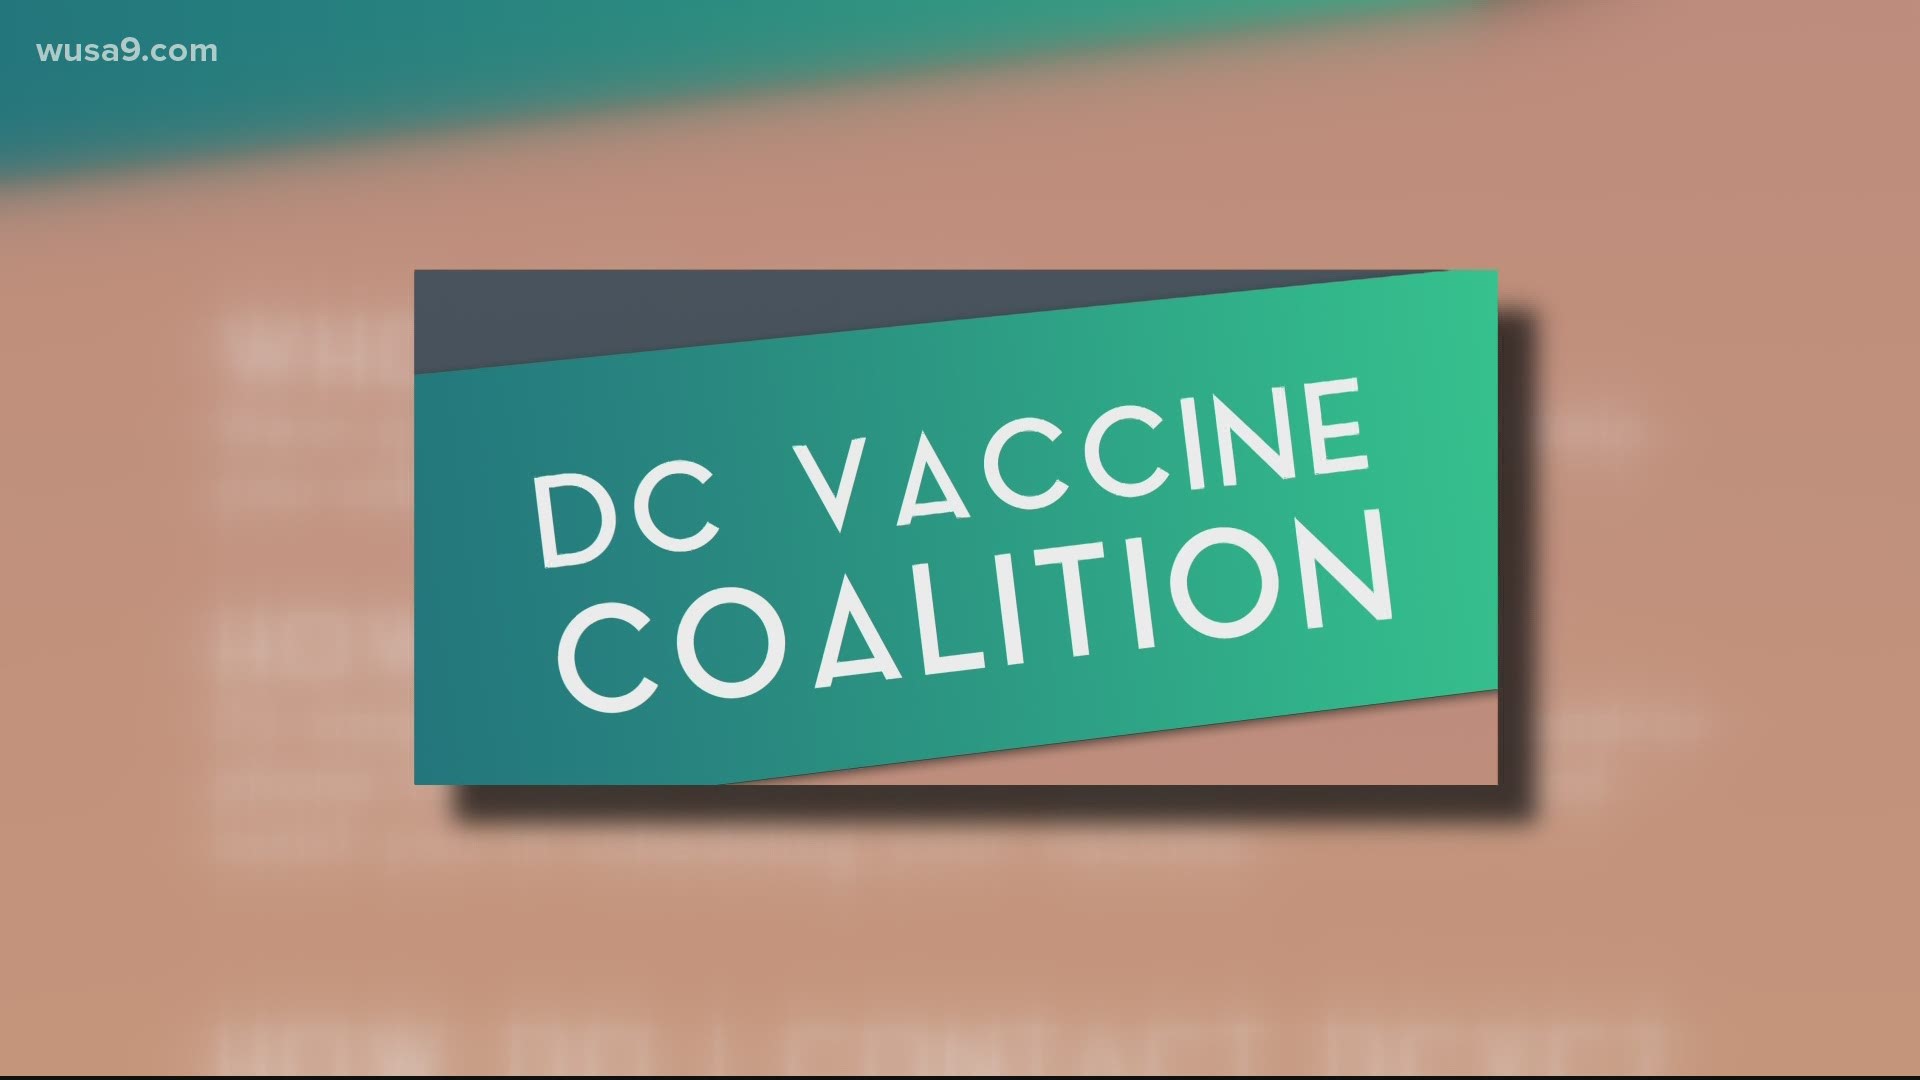 The founder of "DC Vaccine Coalition" worries ongoing technical issues with the District's appointment registration website will only cause more vaccine hesitancy.